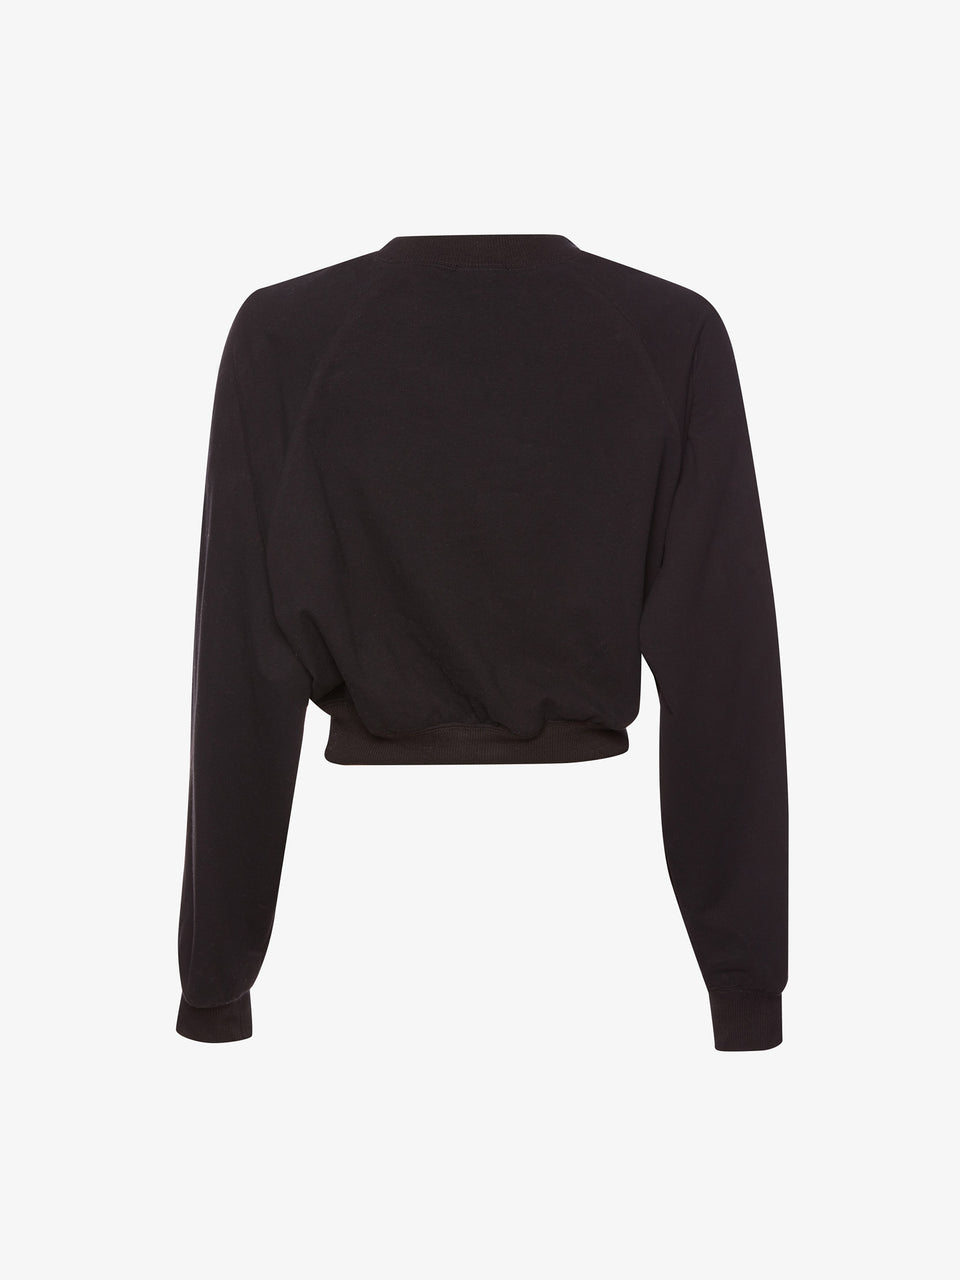 NIA_Krissy_Cropped_Pullover_Black